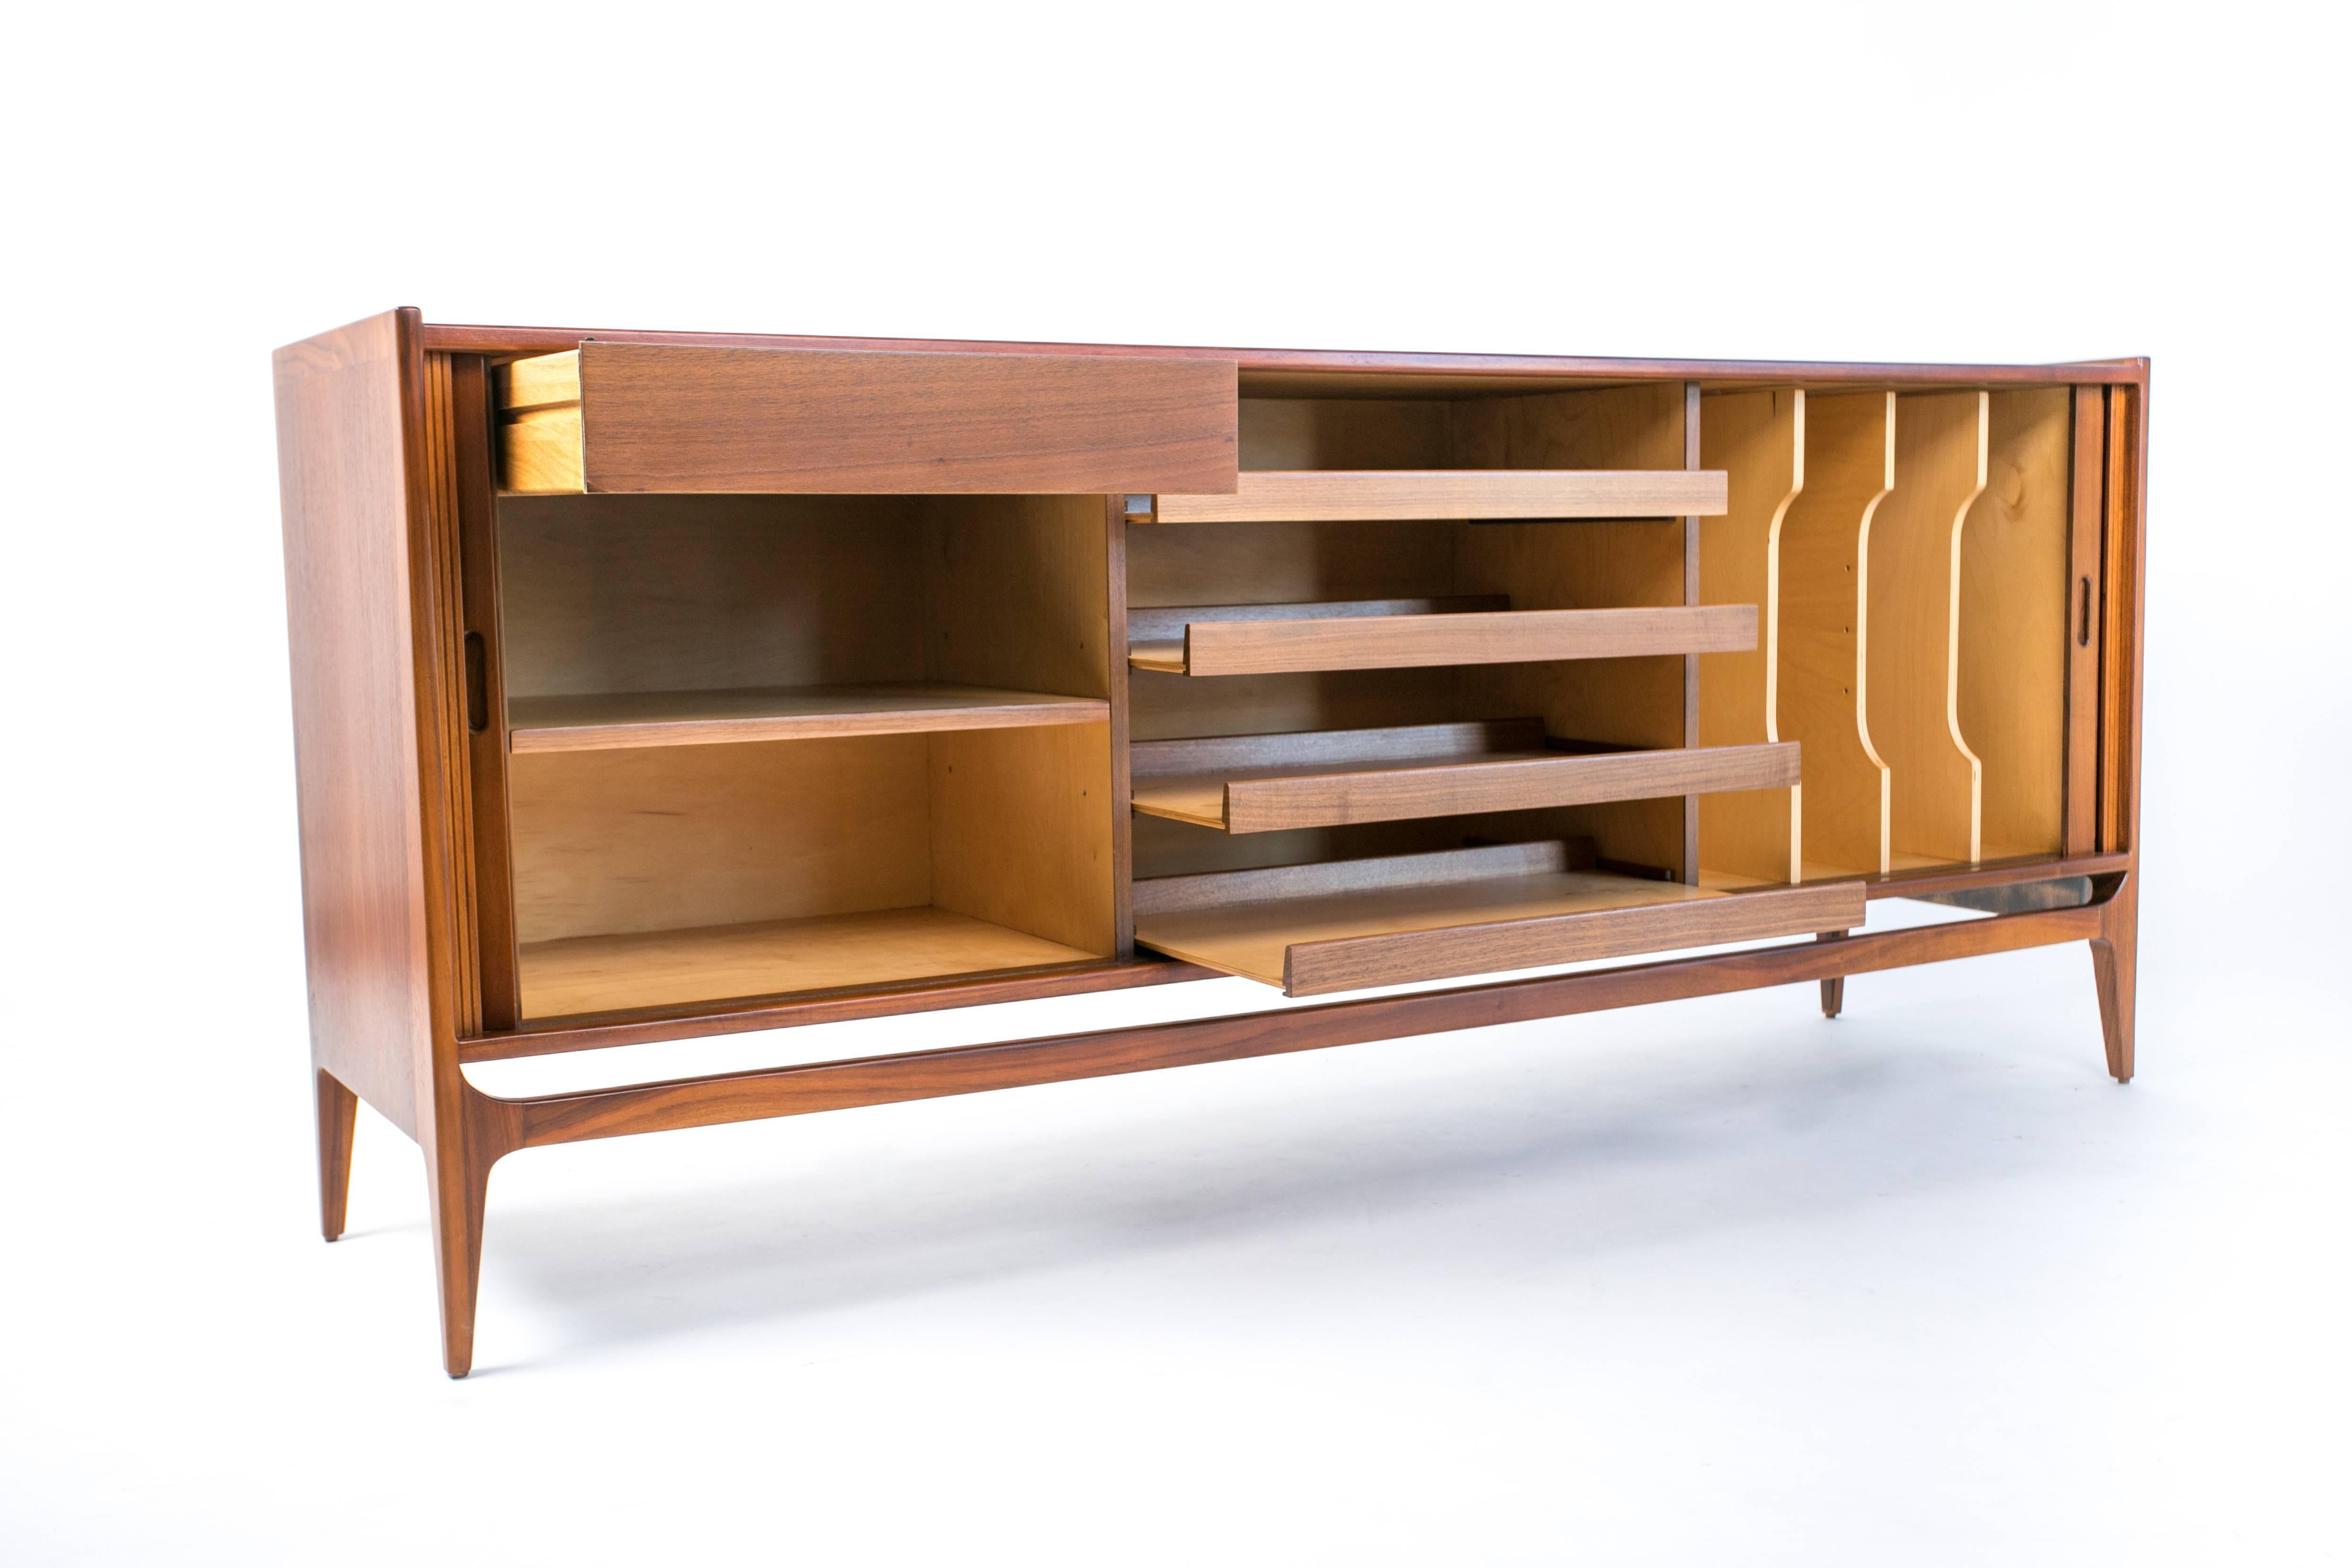 American Tambour Door Credenza by Richard Thompson for Glenn of California